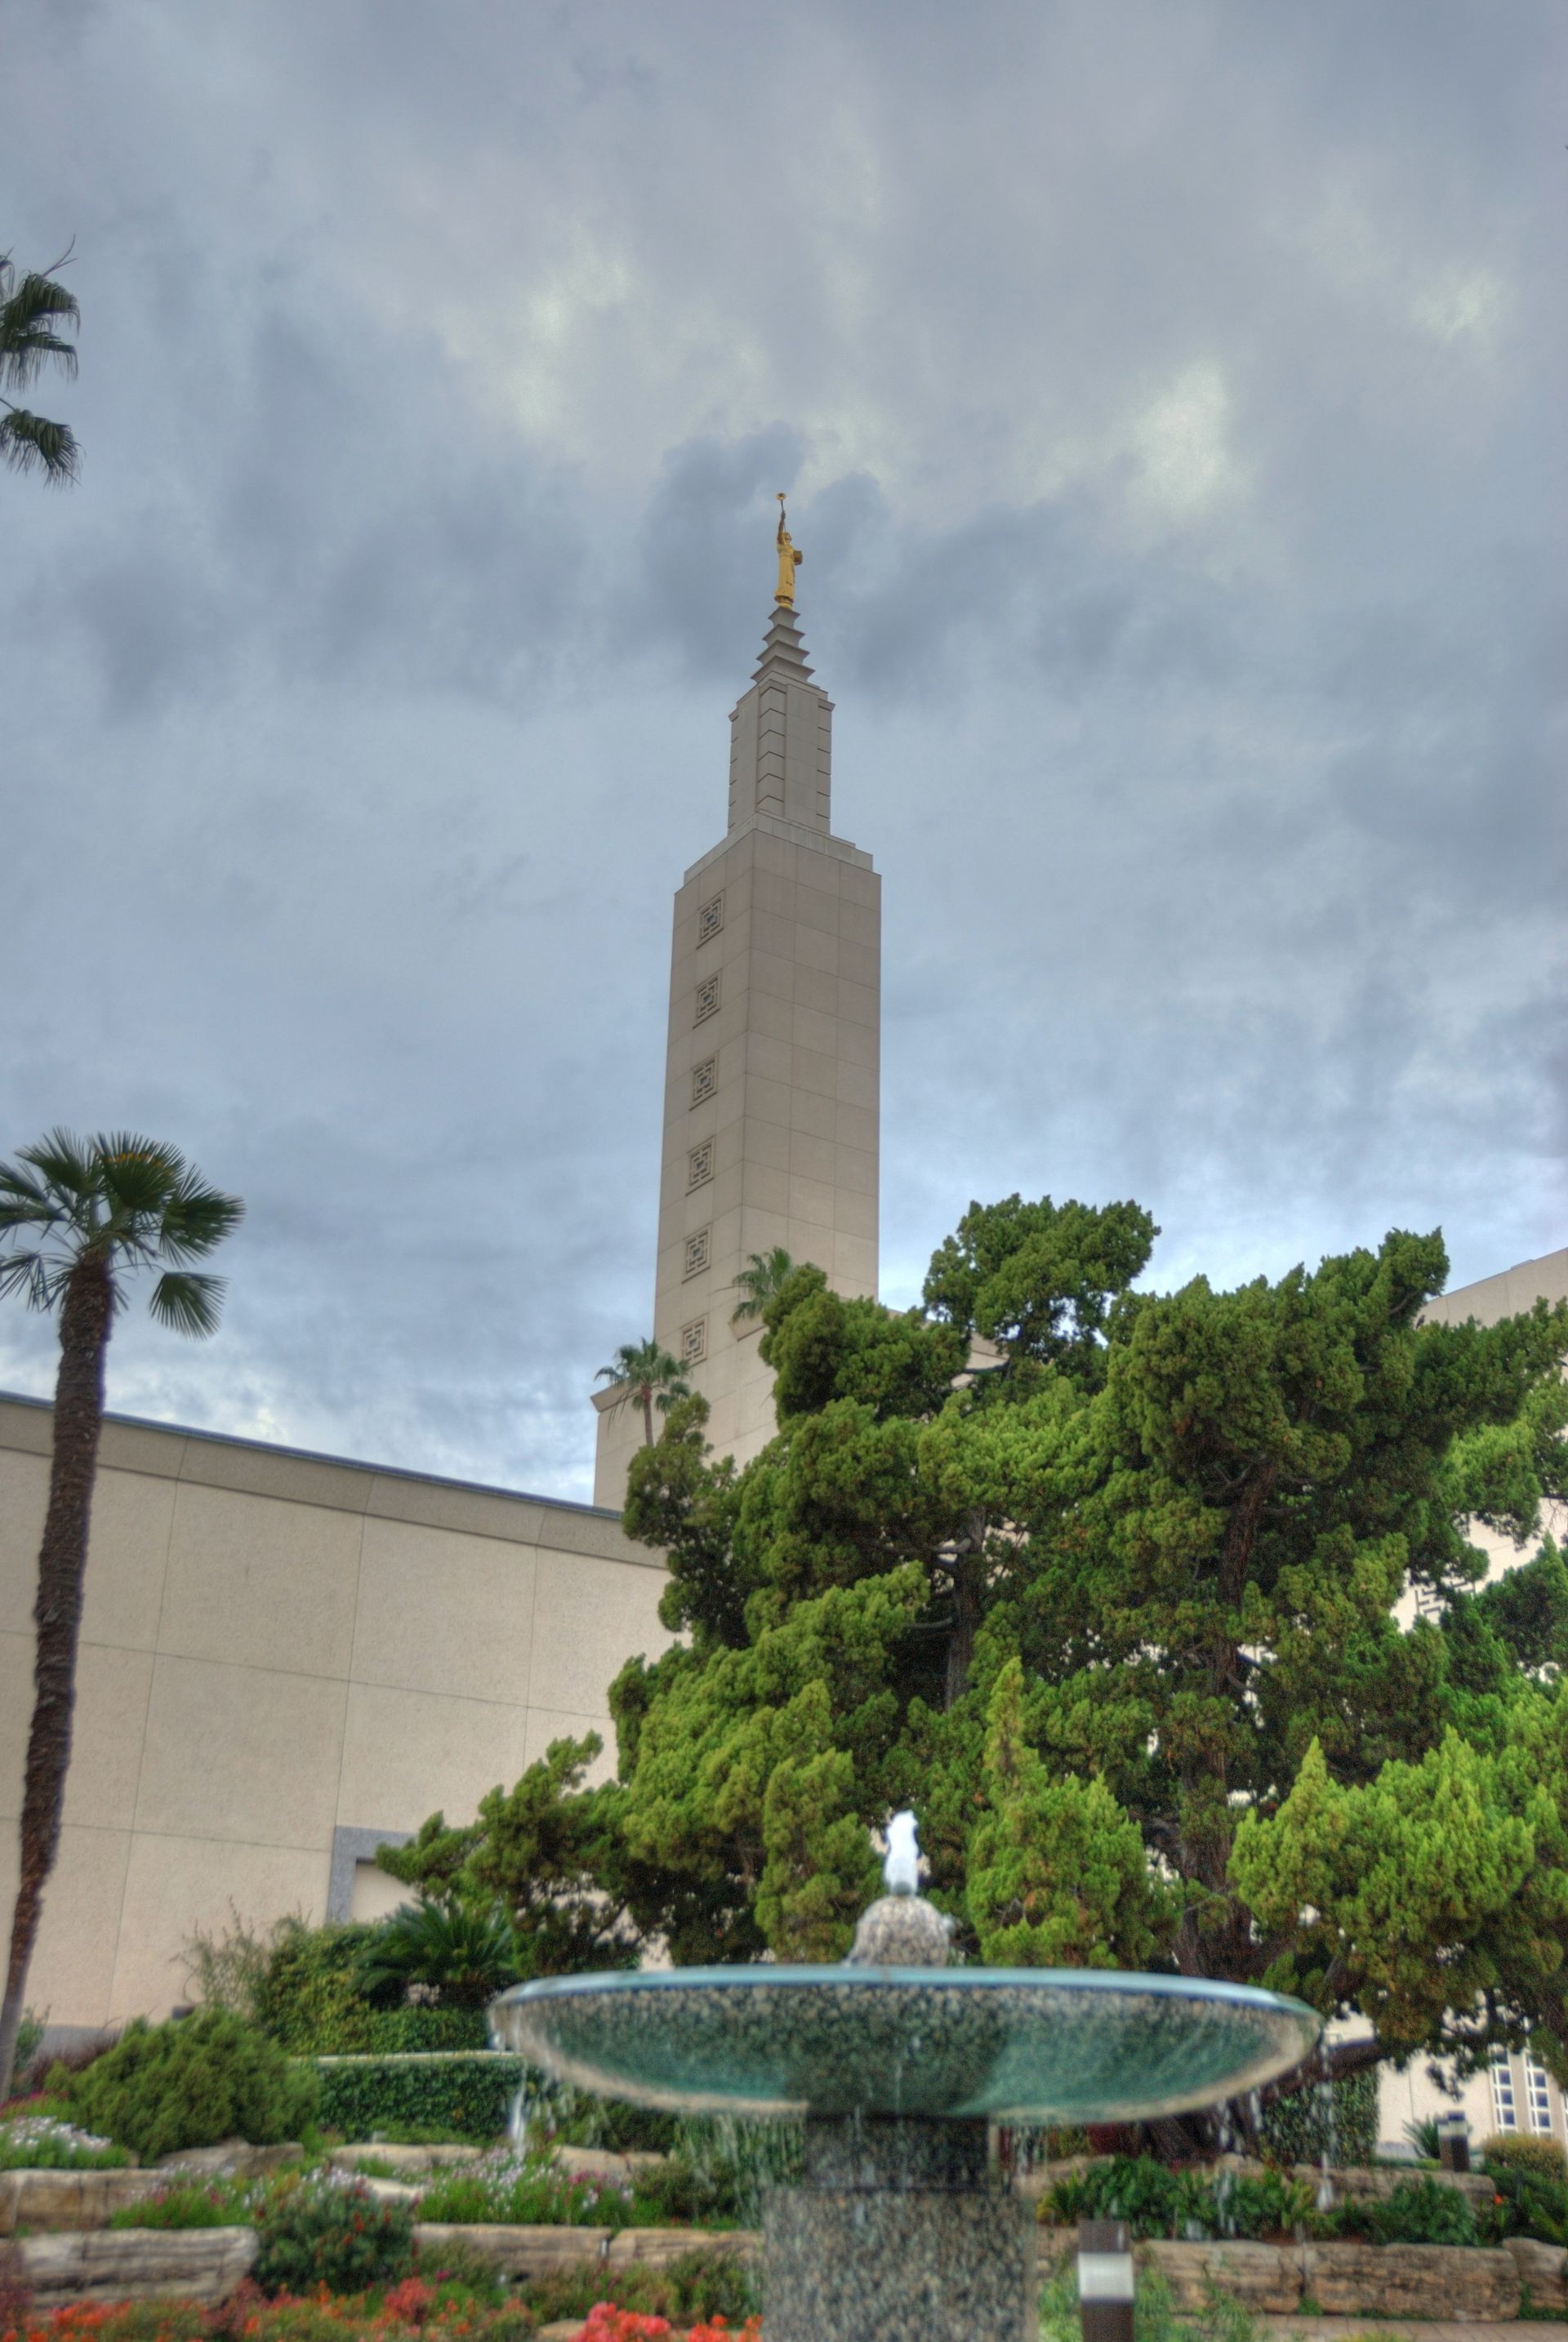 The Los Angeles California Temple fountain, including the spire and scenery.